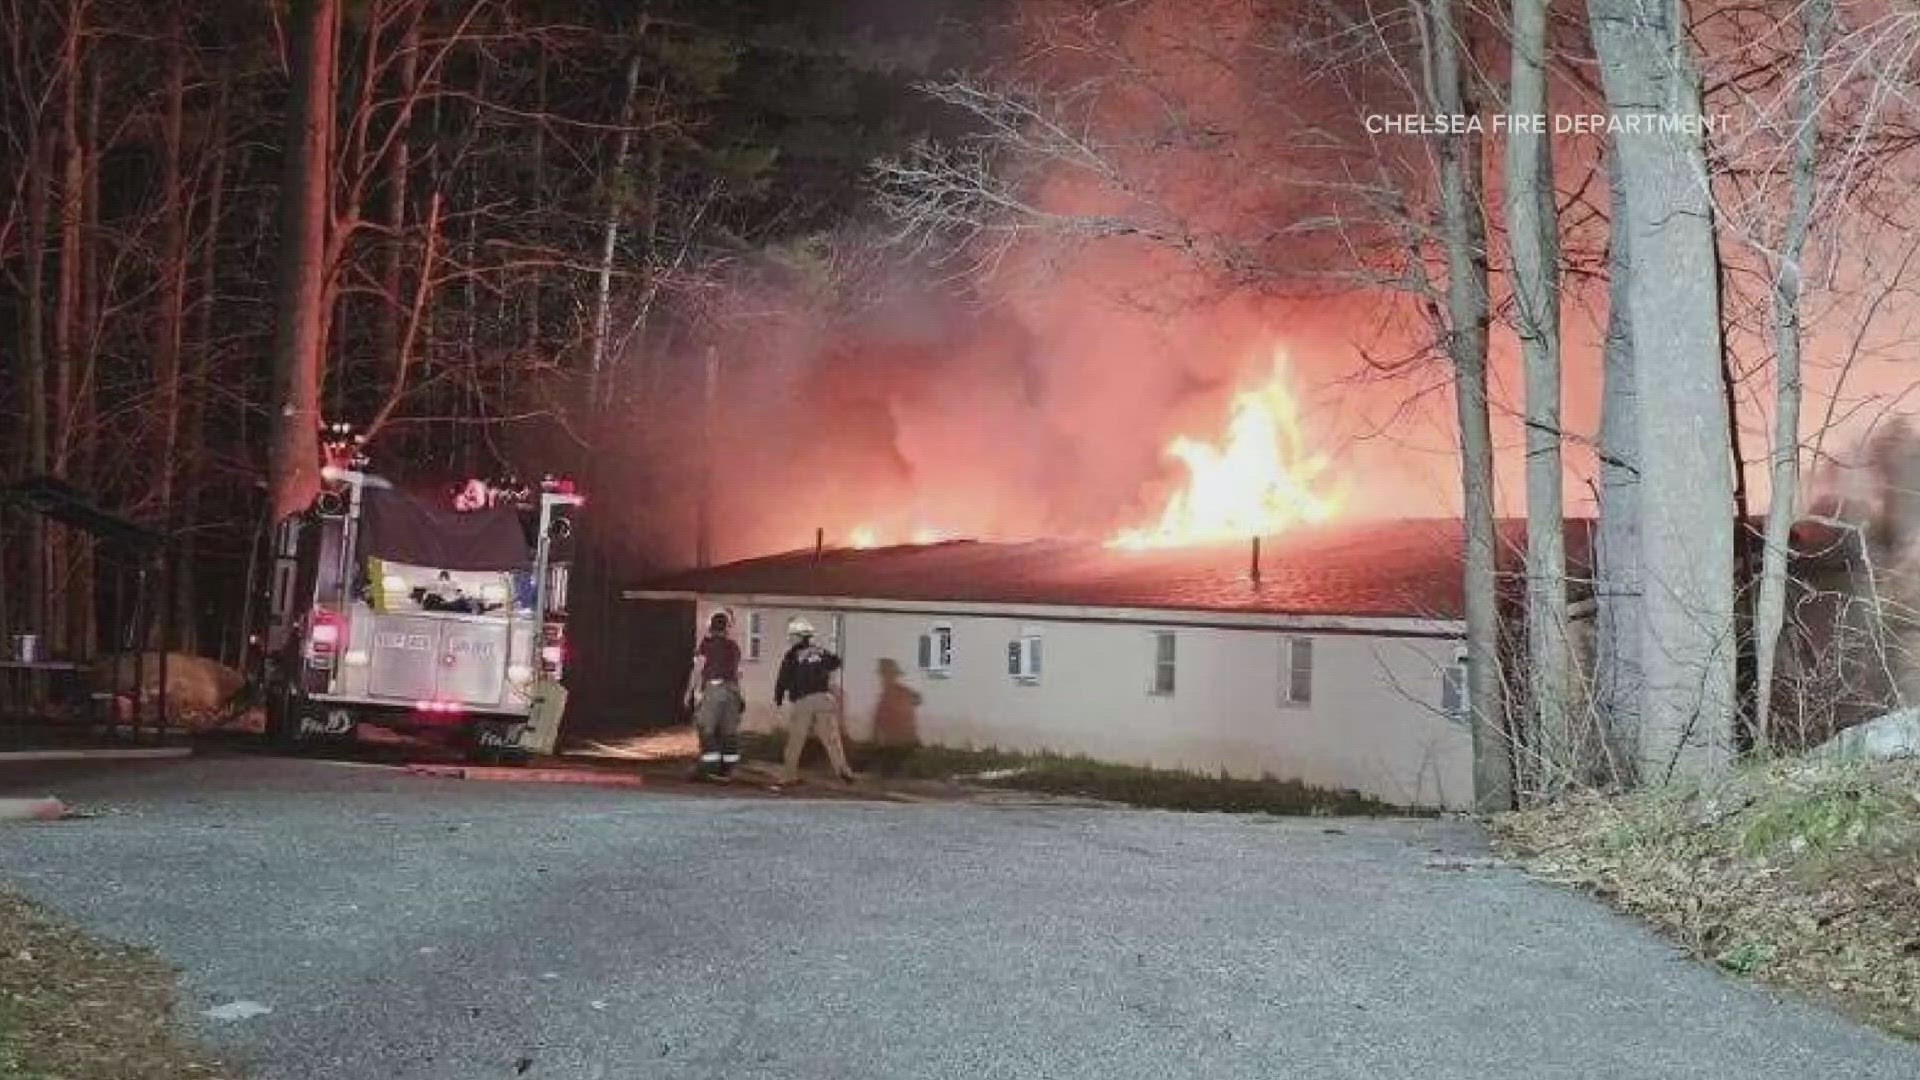 A section of a well-known hotel in Augusta was destroyed by an overnight fire. The portion of the hotel was vacant for the season and undergoing renovations.